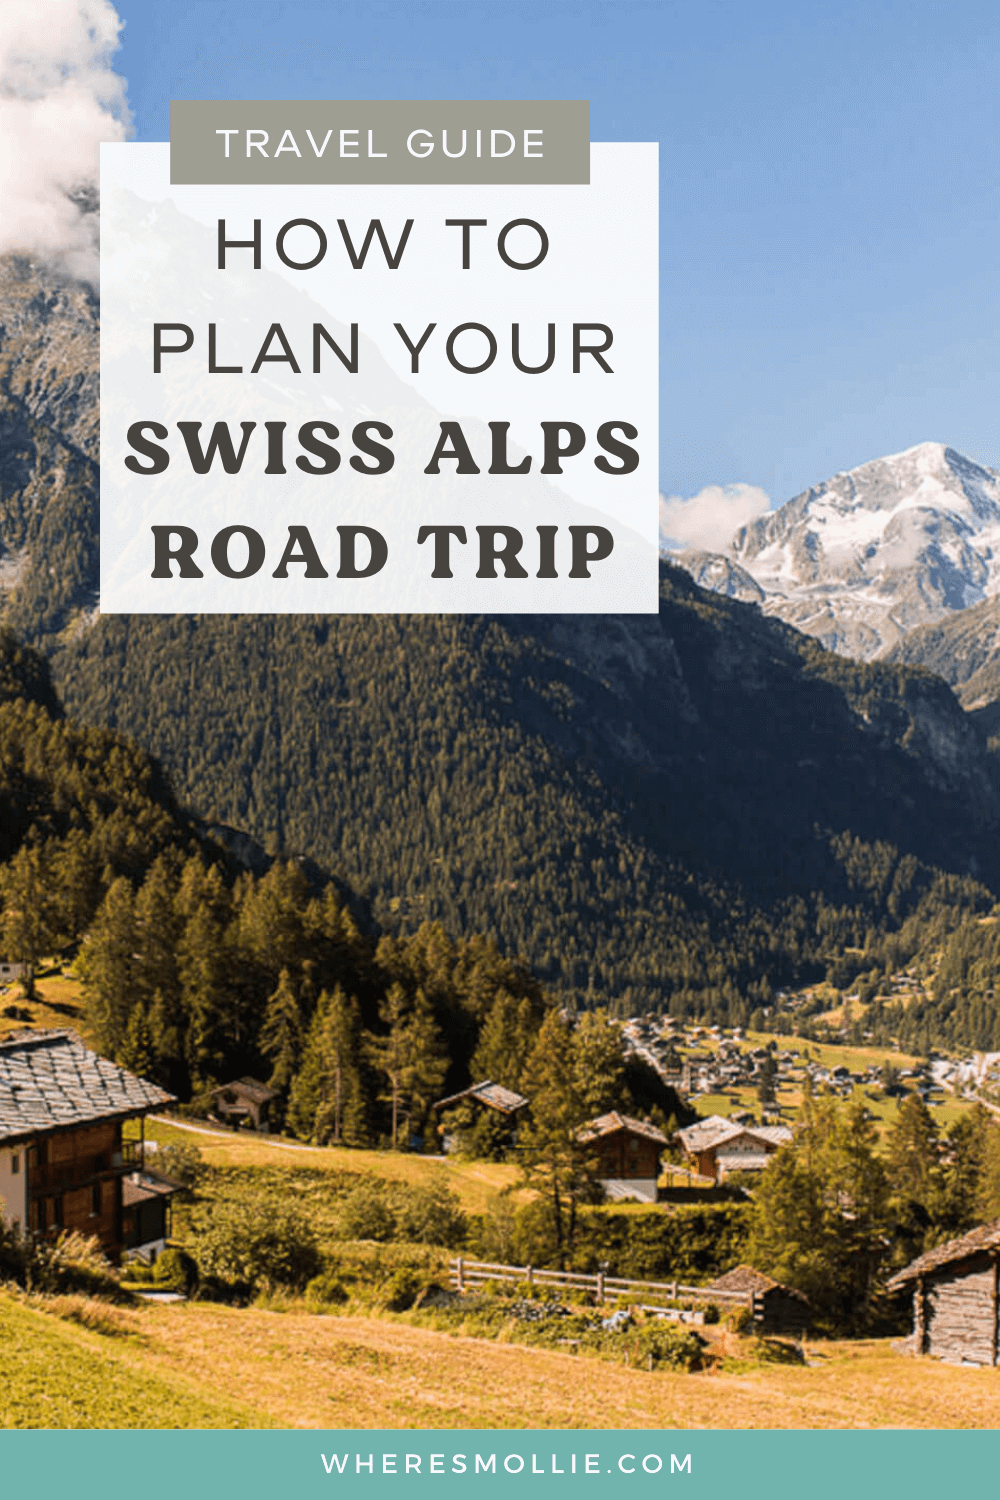 A 4-day Switzerland mountain road trip itinerary: Montreux, Evolene, Saint-Luc and Veyonnaz